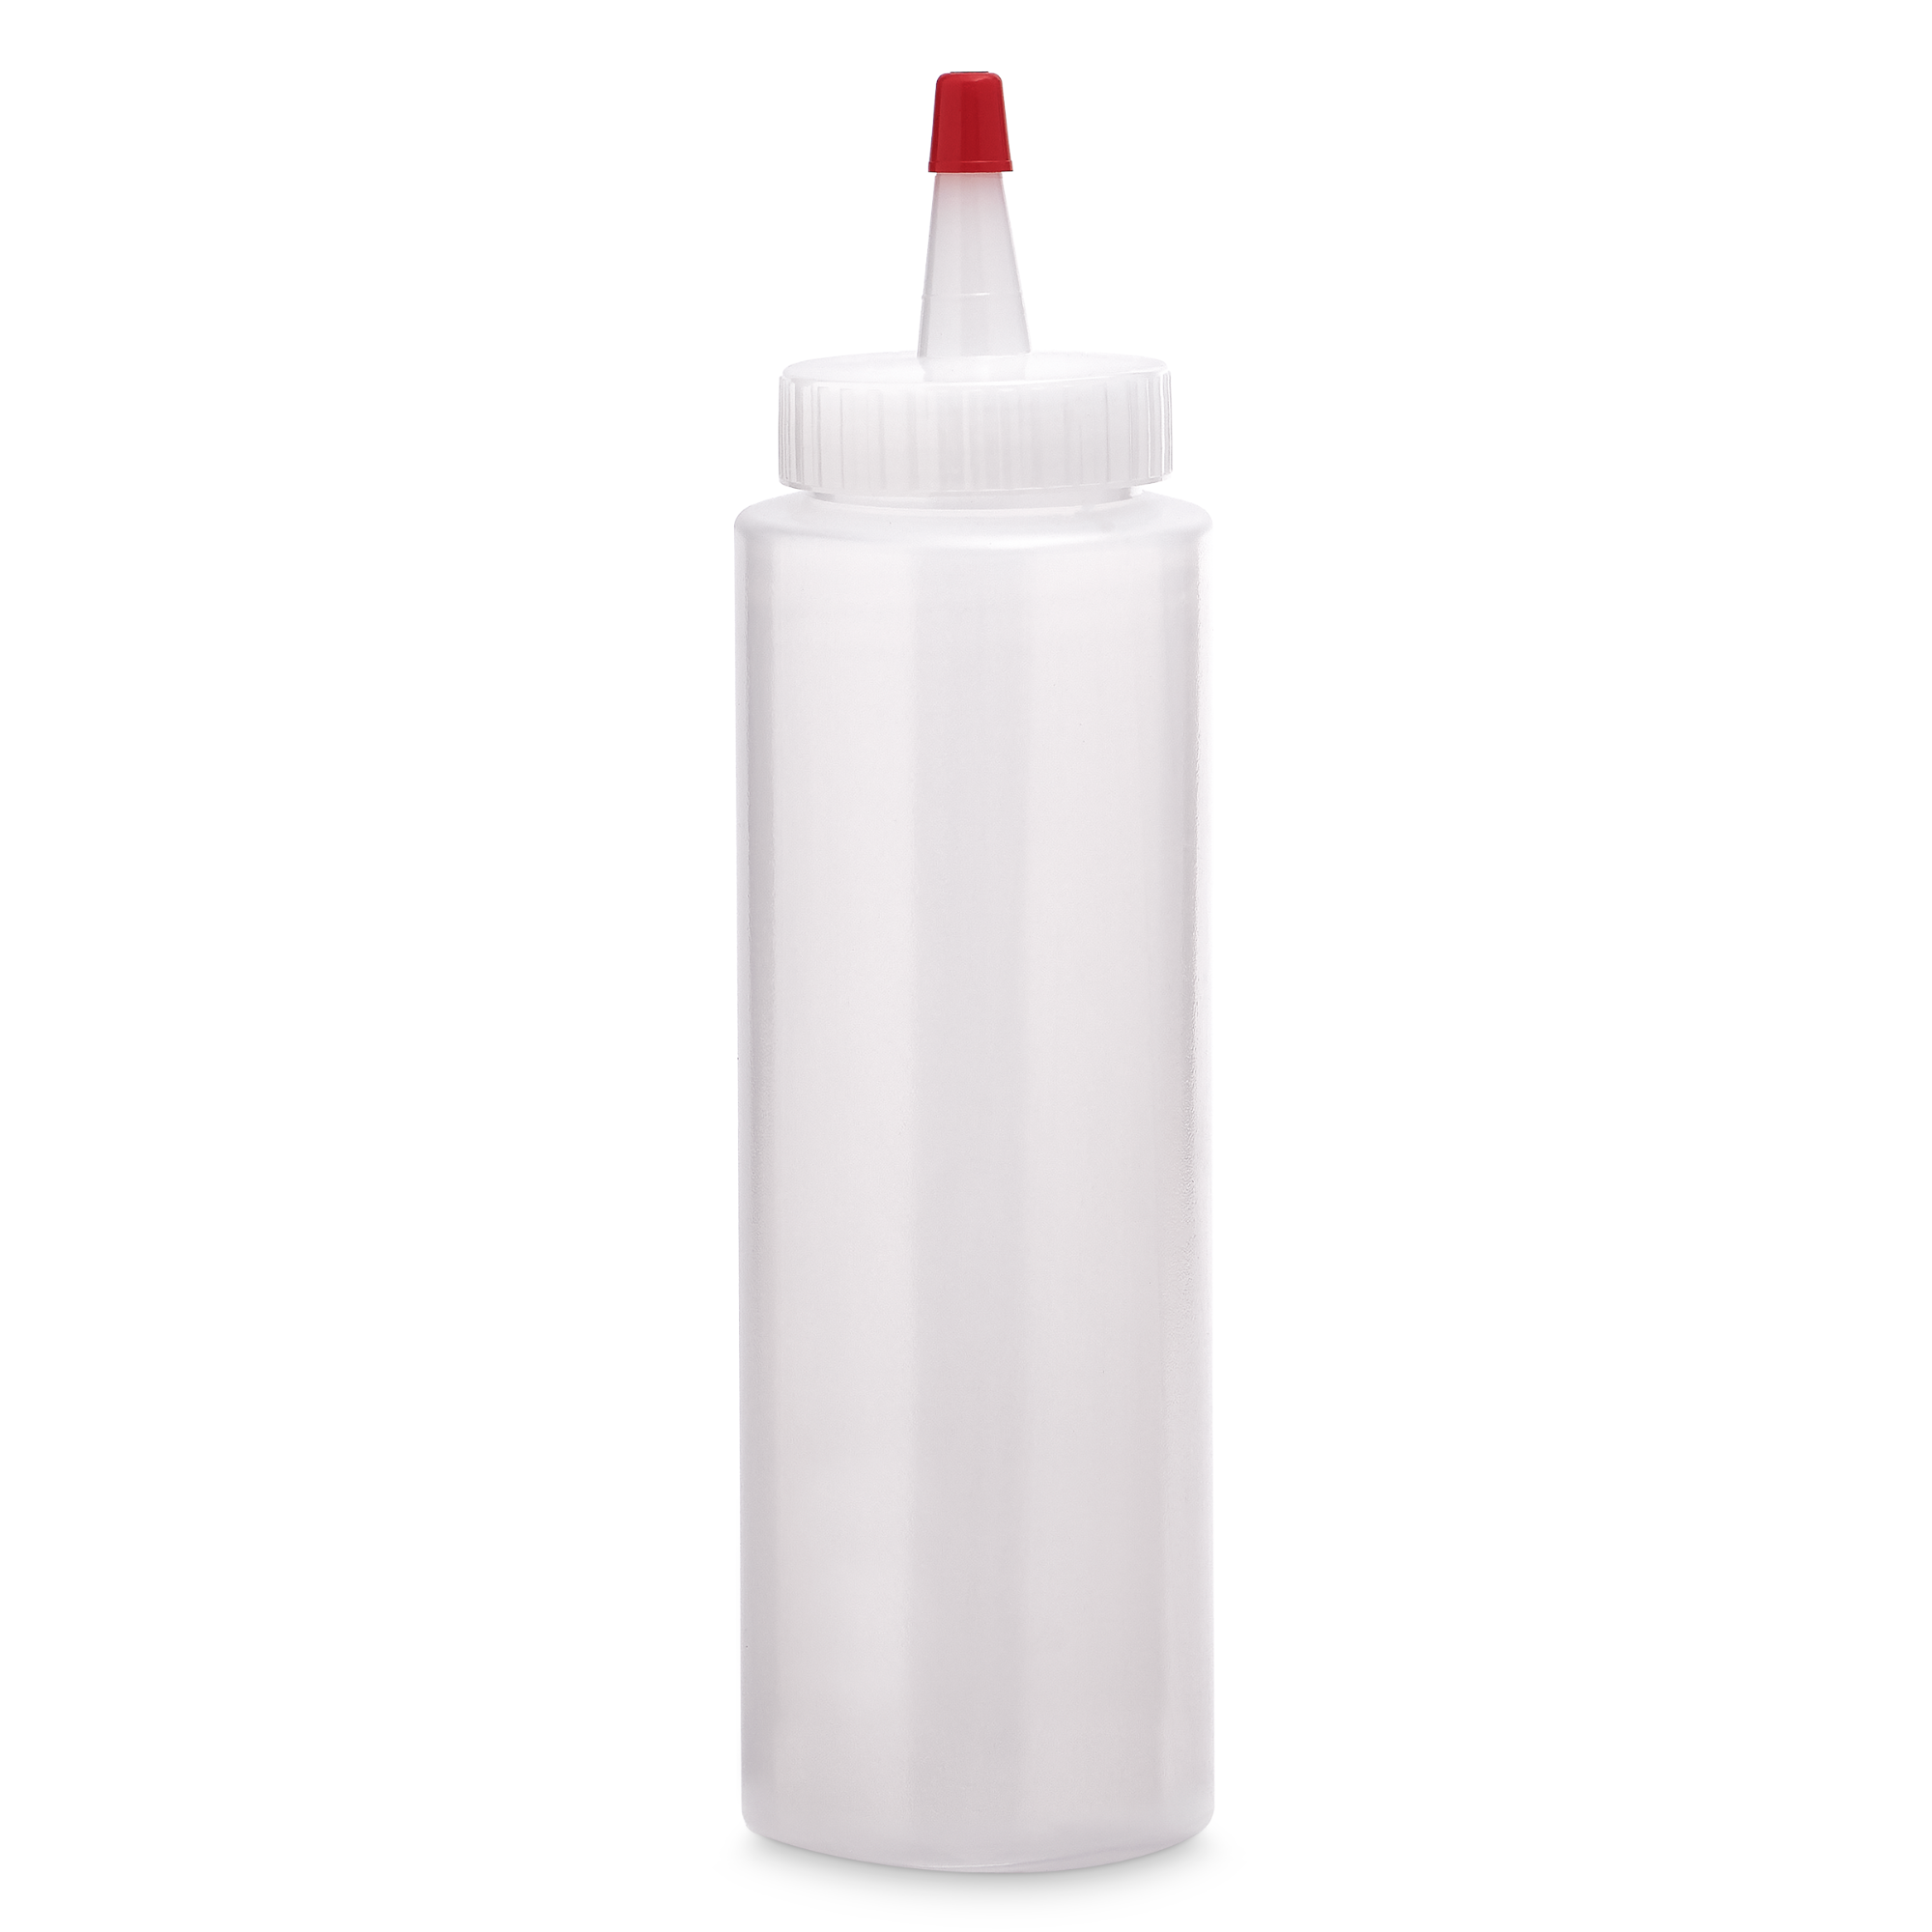 Soft Squeeze Wide-Mouth Applicator Bottle - 8 oz.